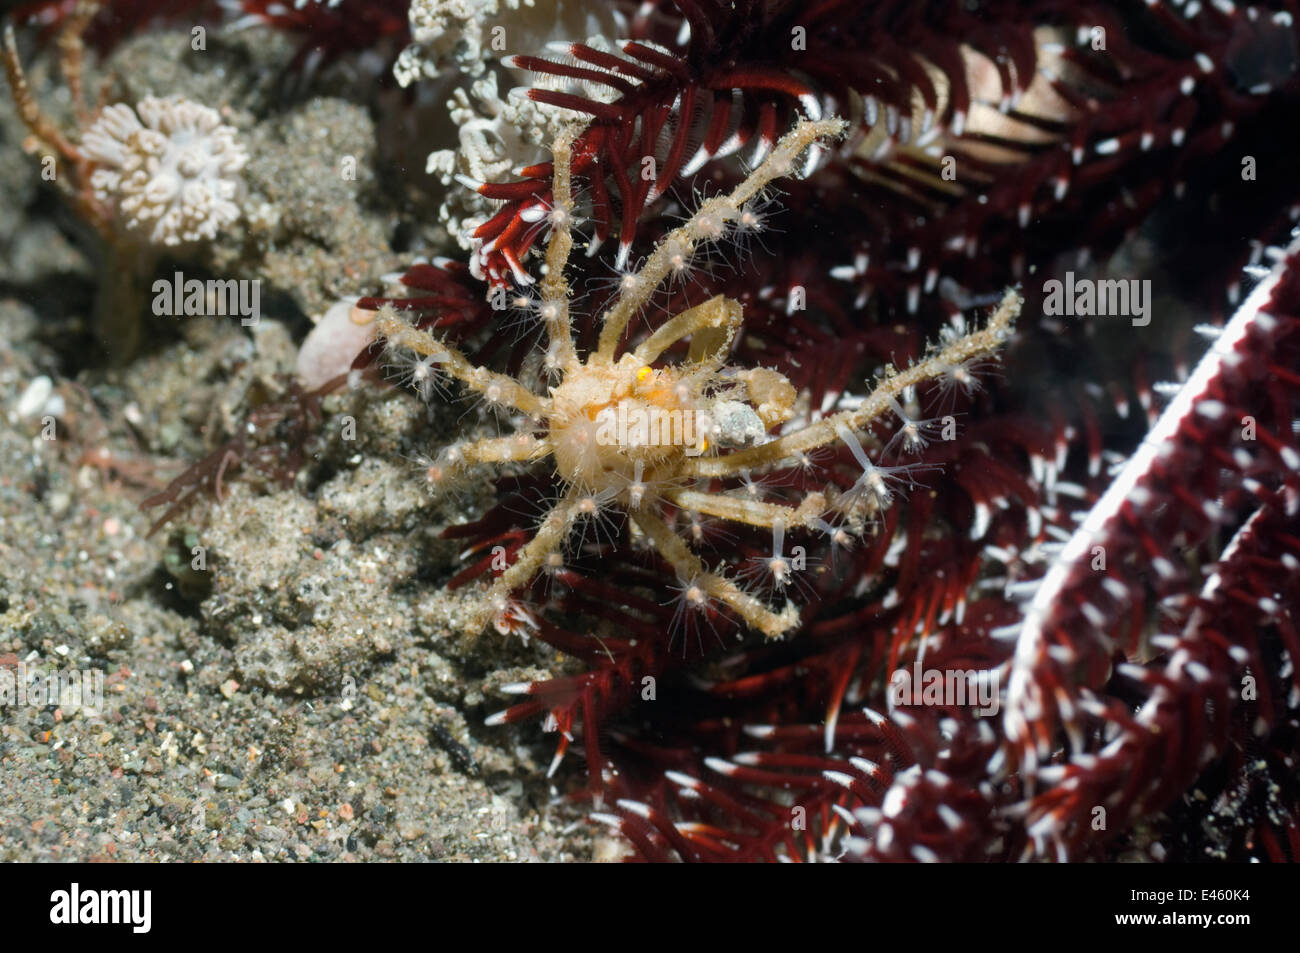 Hydroid or Fairy Crab (Hyastenus bipinosus) on crinoid or featherstar. Hydroid polyps are growing on its carapace. Rinca, Indonesia, October. Stock Photo